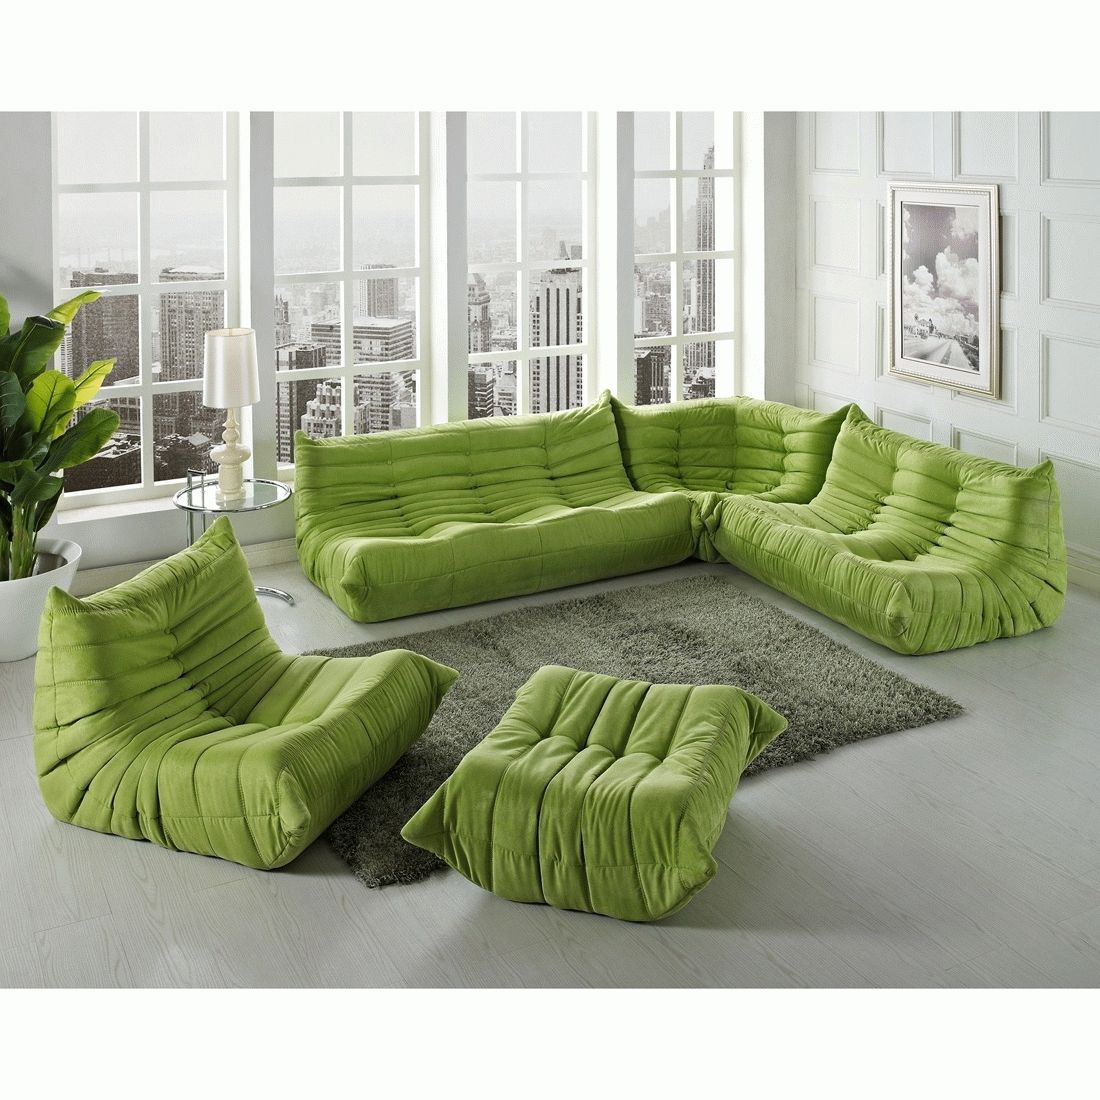 Low Height Sofa With Ideas Inspiration 29584 | Kengire Inside Low Height Sofas (View 2 of 7)